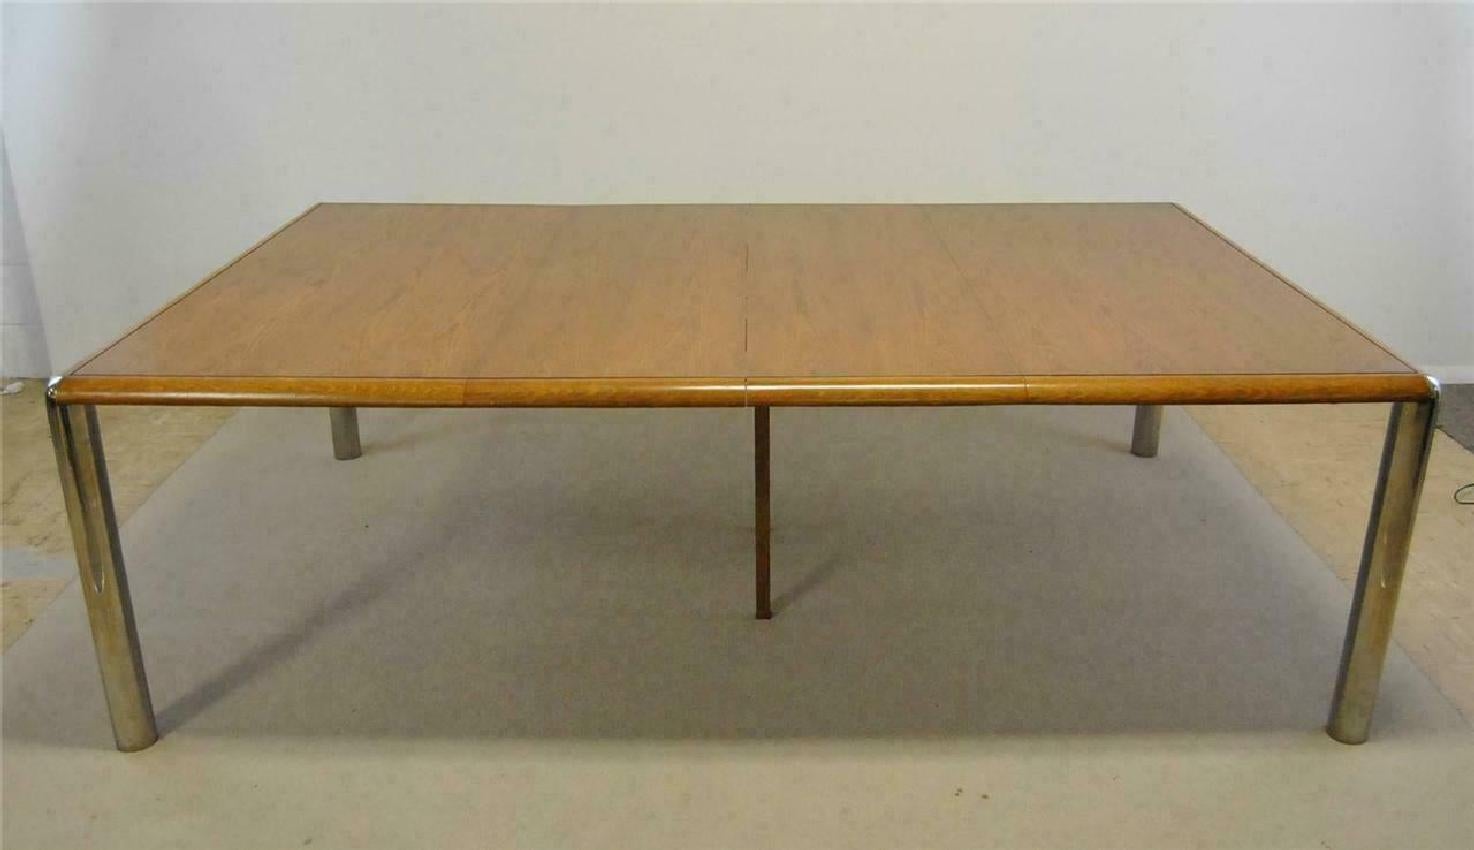 Pace Style Mid-Century Modern Oak and Chrome Dining Table, with Leaves In Good Condition For Sale In Toledo, OH